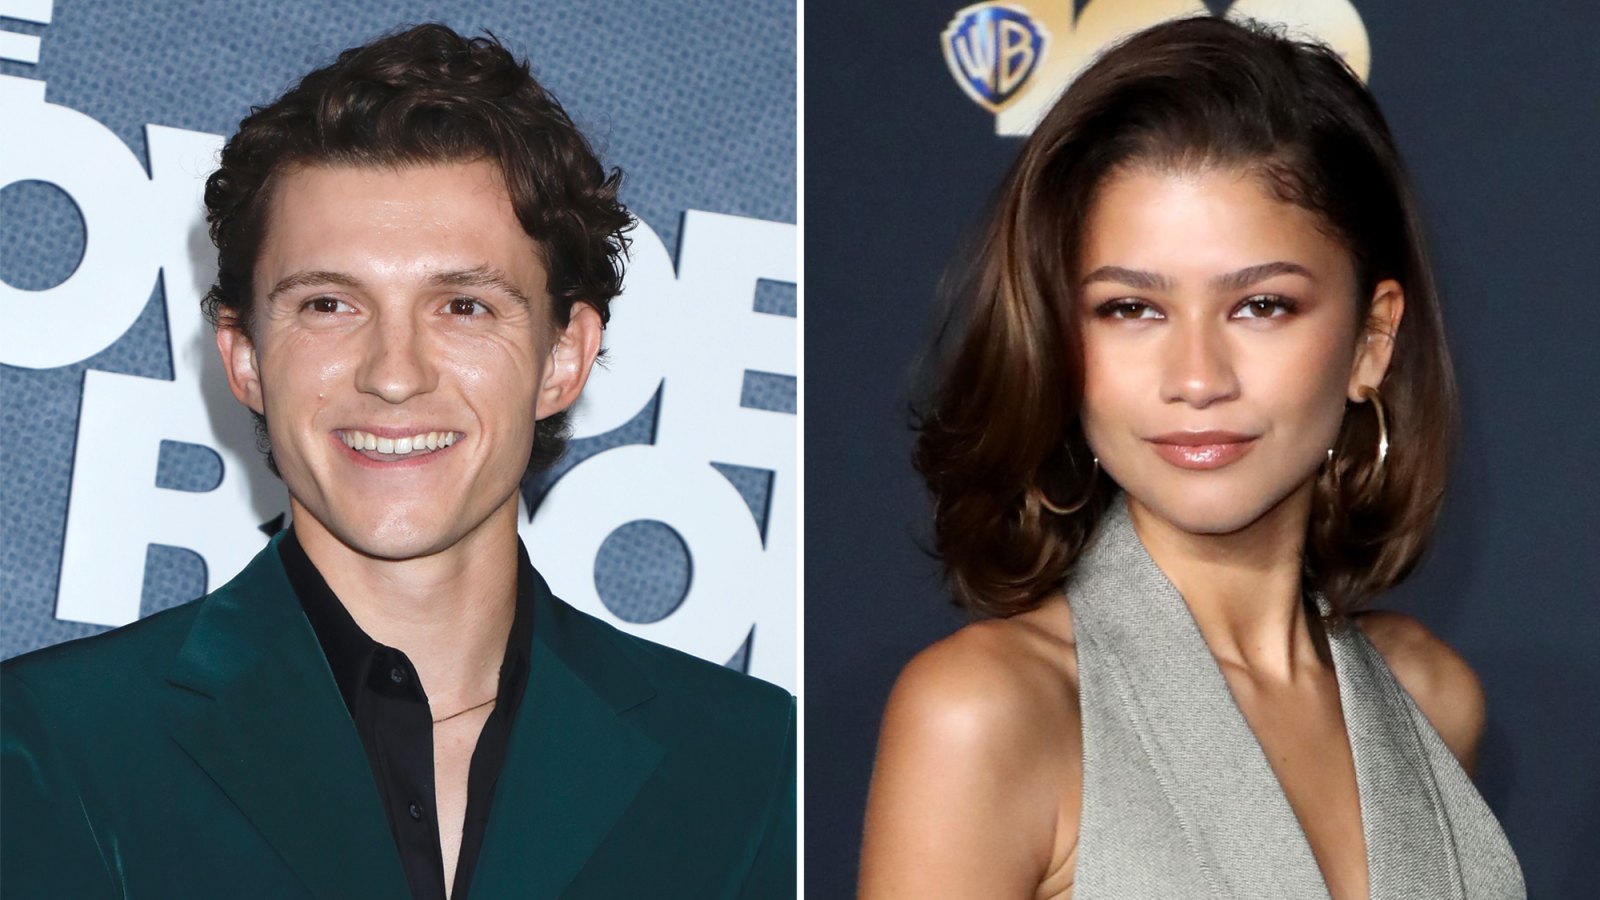 Tom Holland and Zendaya Pack on PDA While Eating Ice Cream